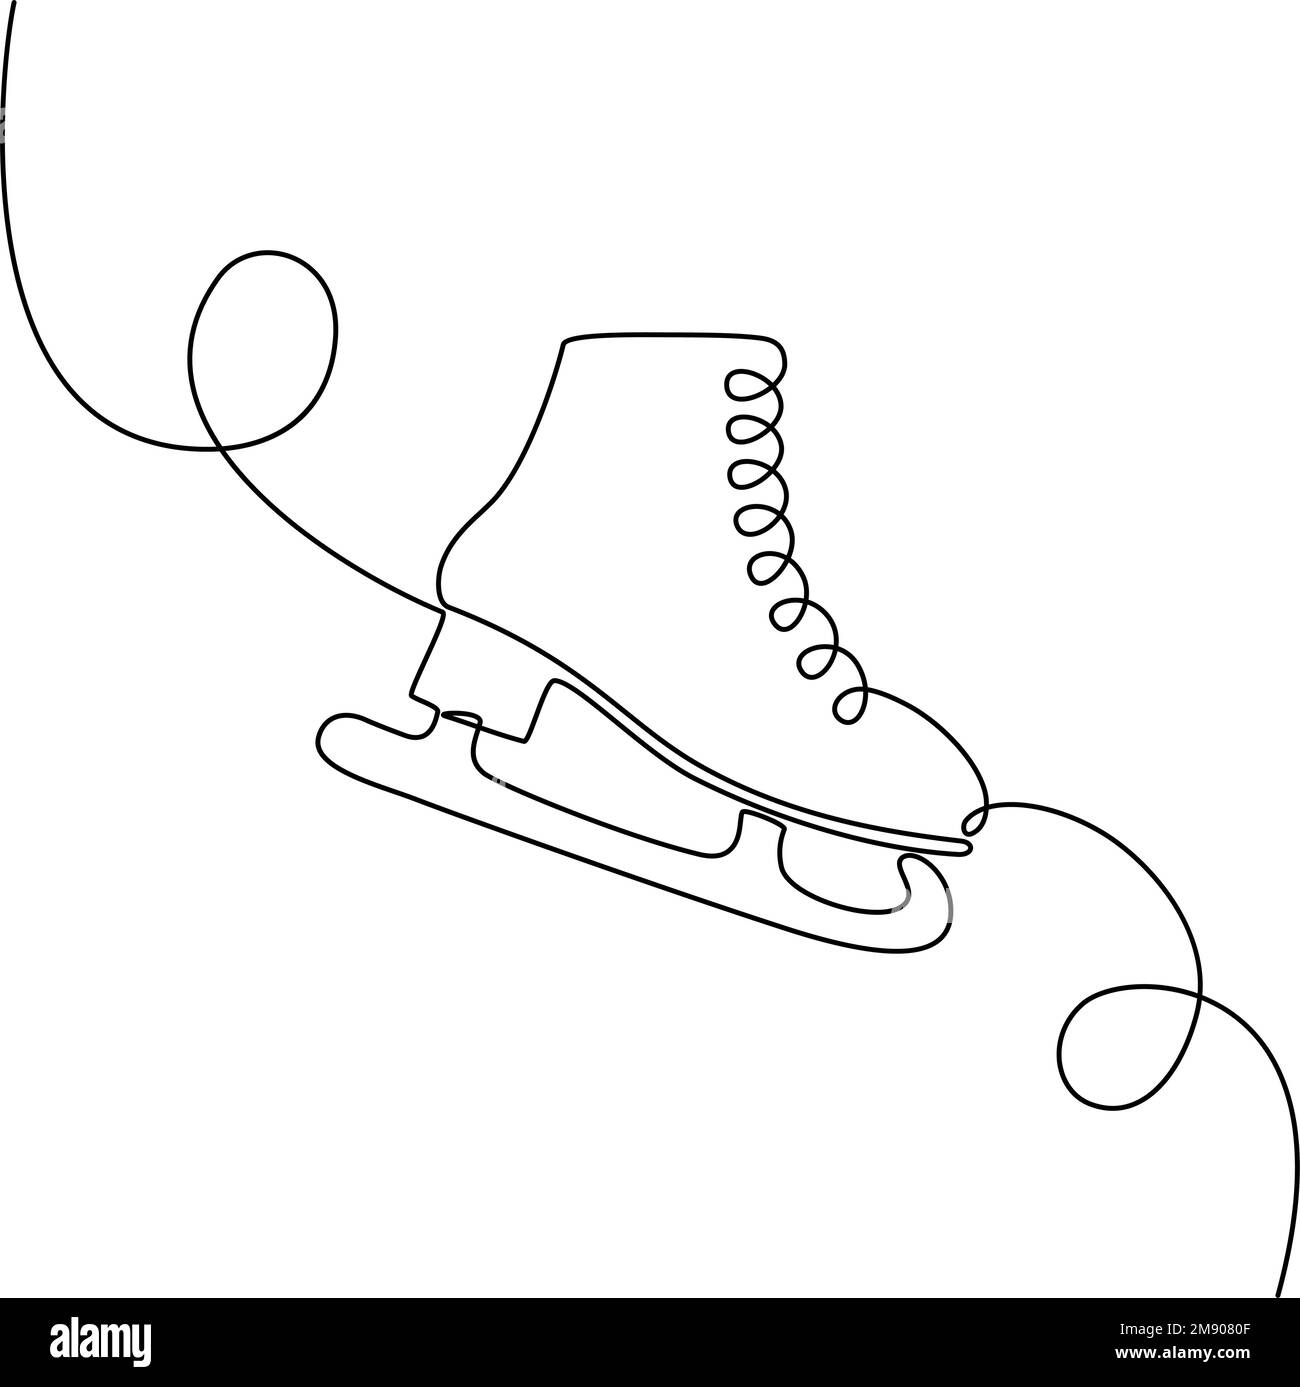 Continuous one line drawing of ice skate. Vector illustration Stock Vector